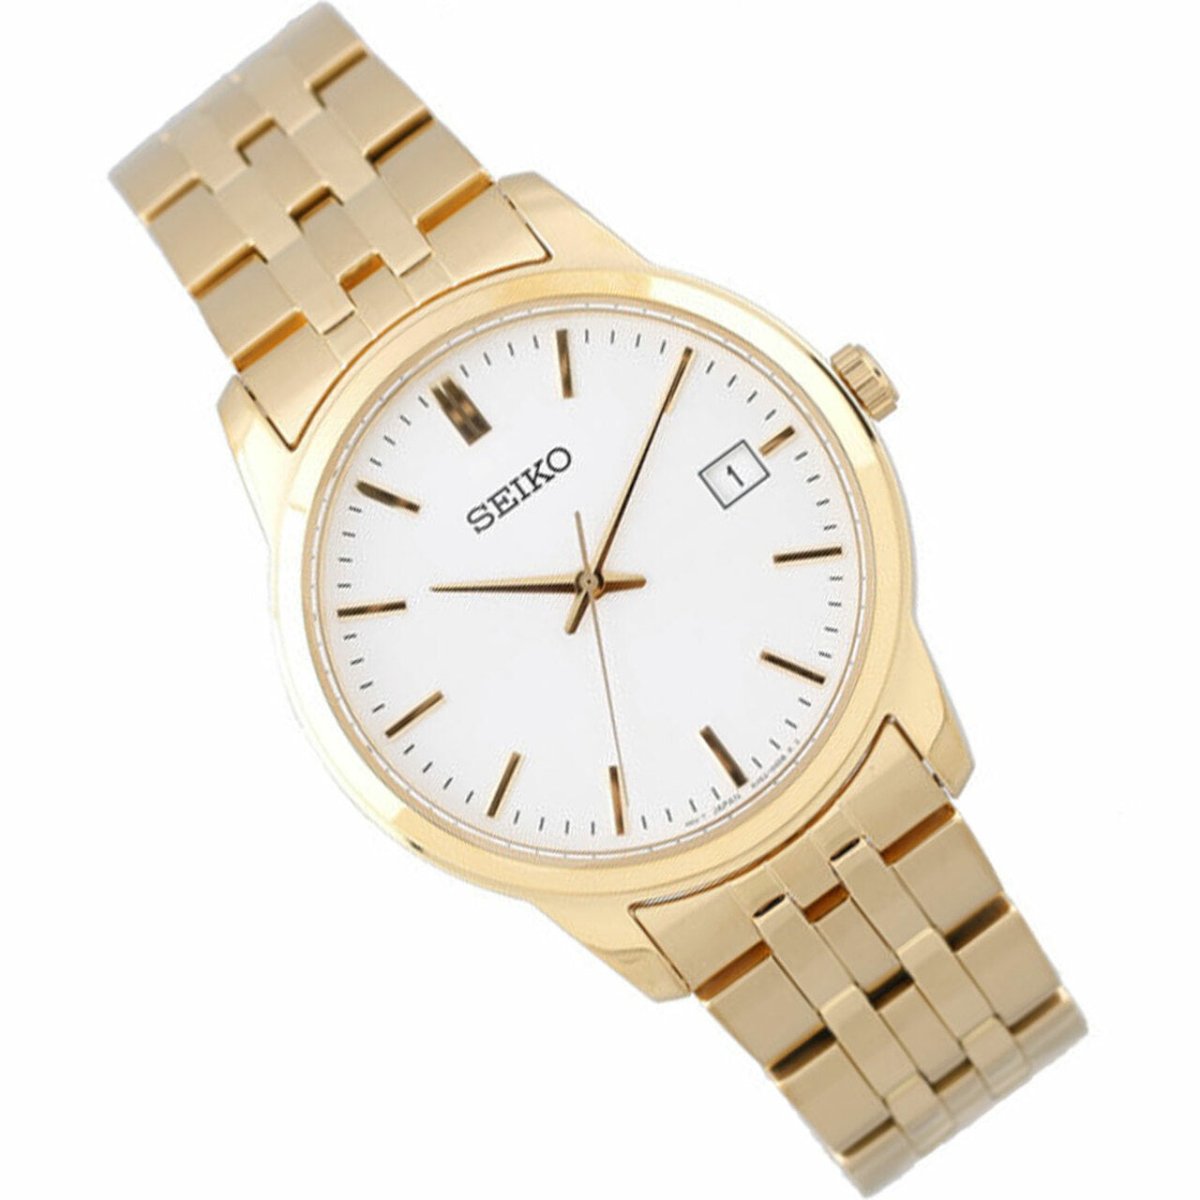 Buy SEIKO Gold Stainless Steel Men's Dress Watch - SUR404P1 | Time Watch  Specialists